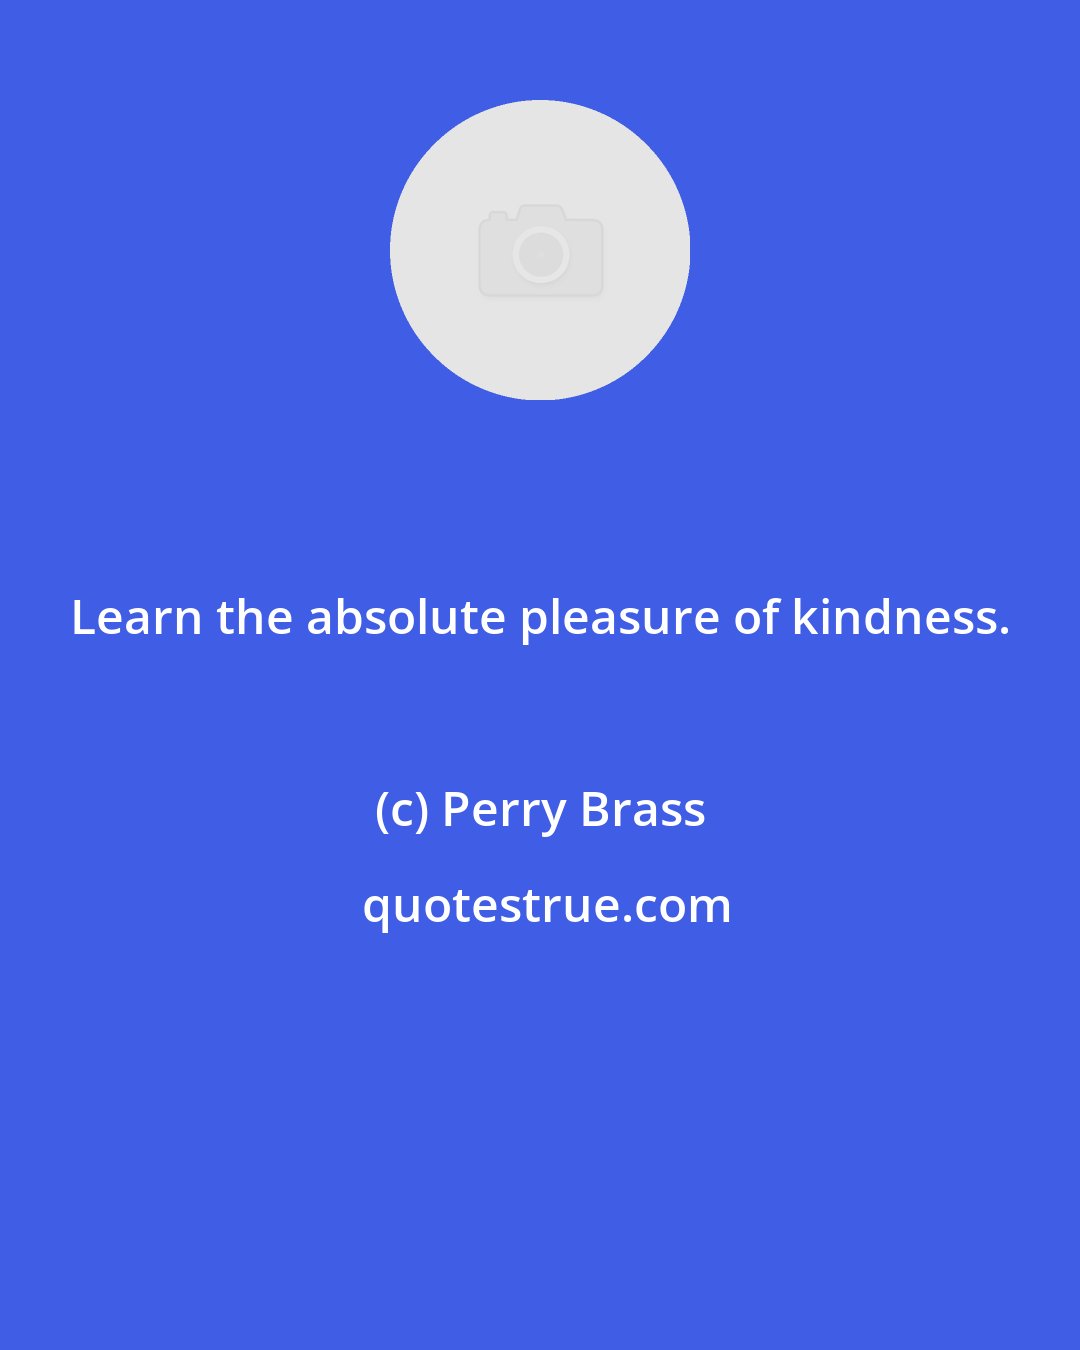 Perry Brass: Learn the absolute pleasure of kindness.